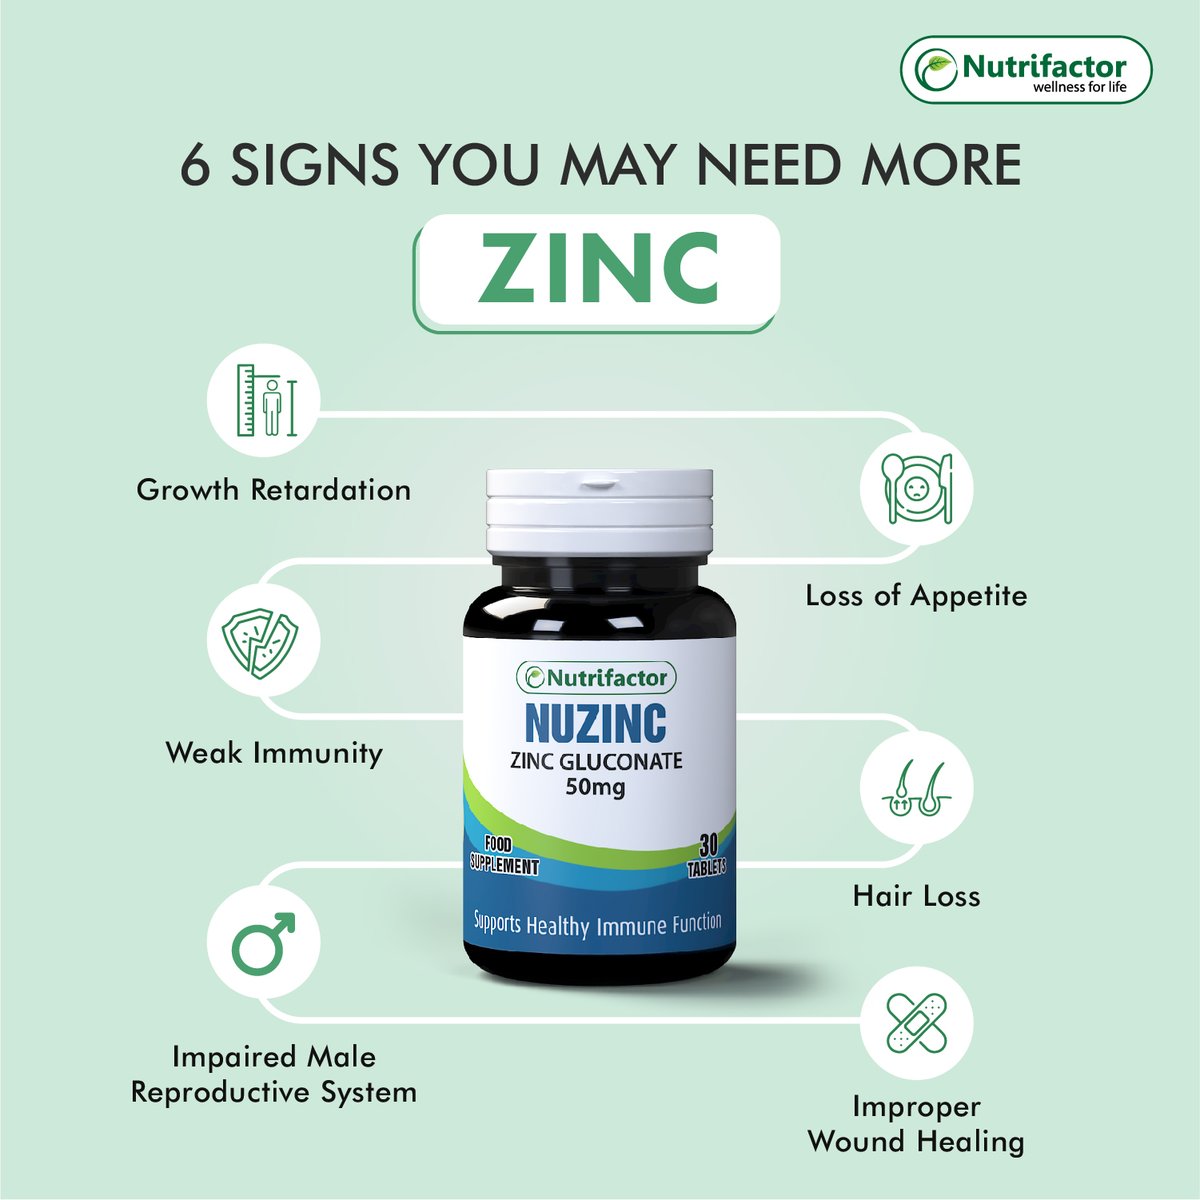 Our good health depends upon the right balance of all the essential nutrients, and Zinc is one of those. 
 
#nutrifcator #wellnessforlife #zinc #zincdeficiency #immunehealth #woundhealing #nuts #meat #essentialnutrient #bodyfunction